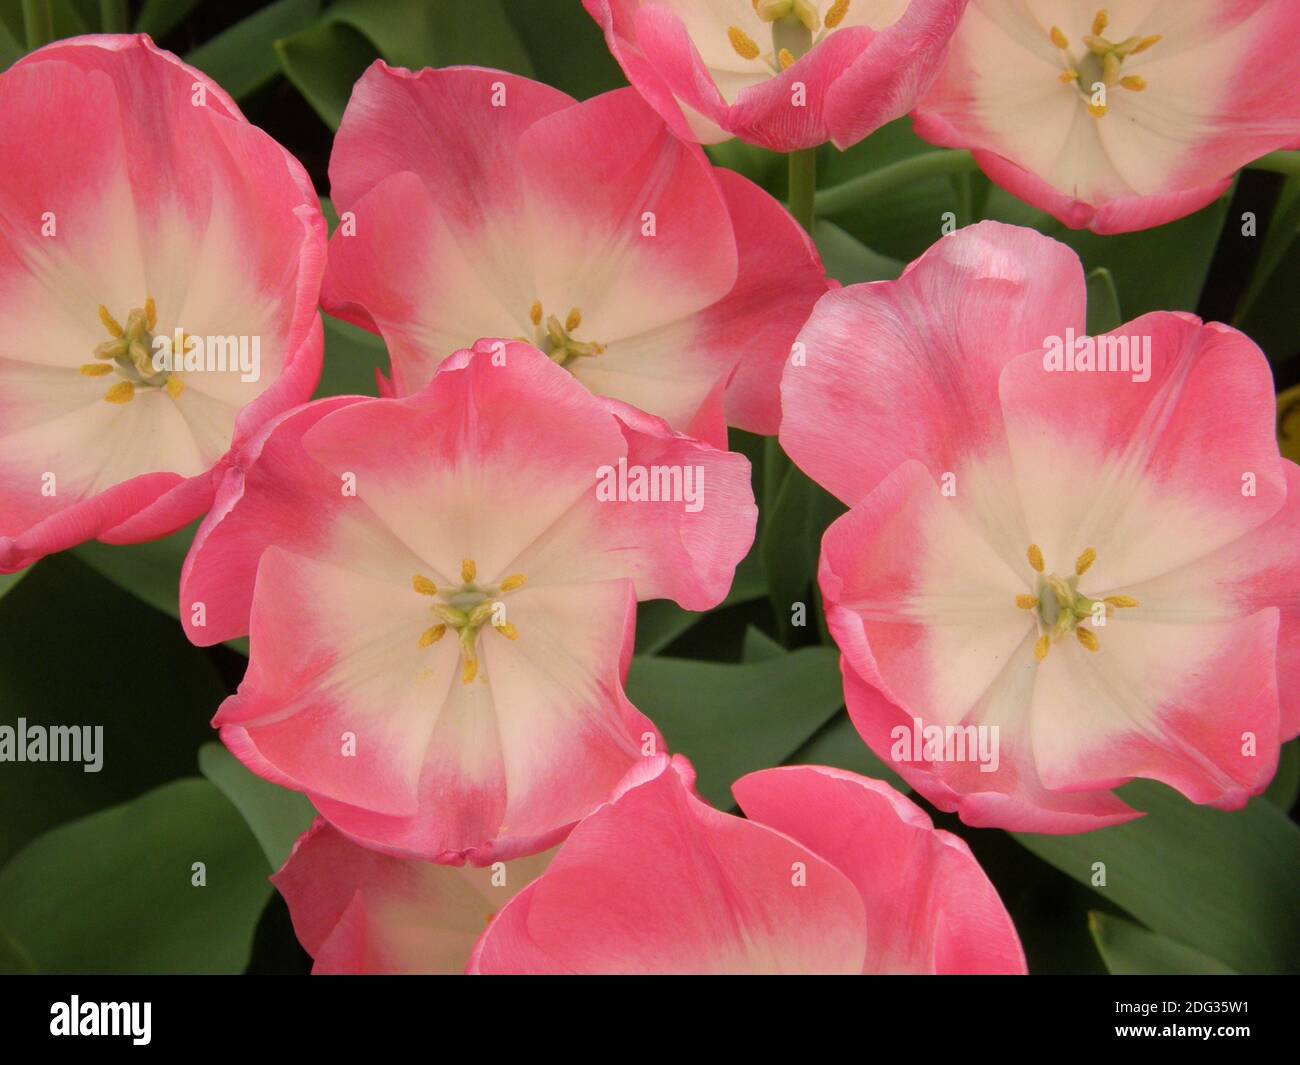 Pink and white Single Late tulips (Tulipa) Dreamland bloom in a garden in April Stock Photo